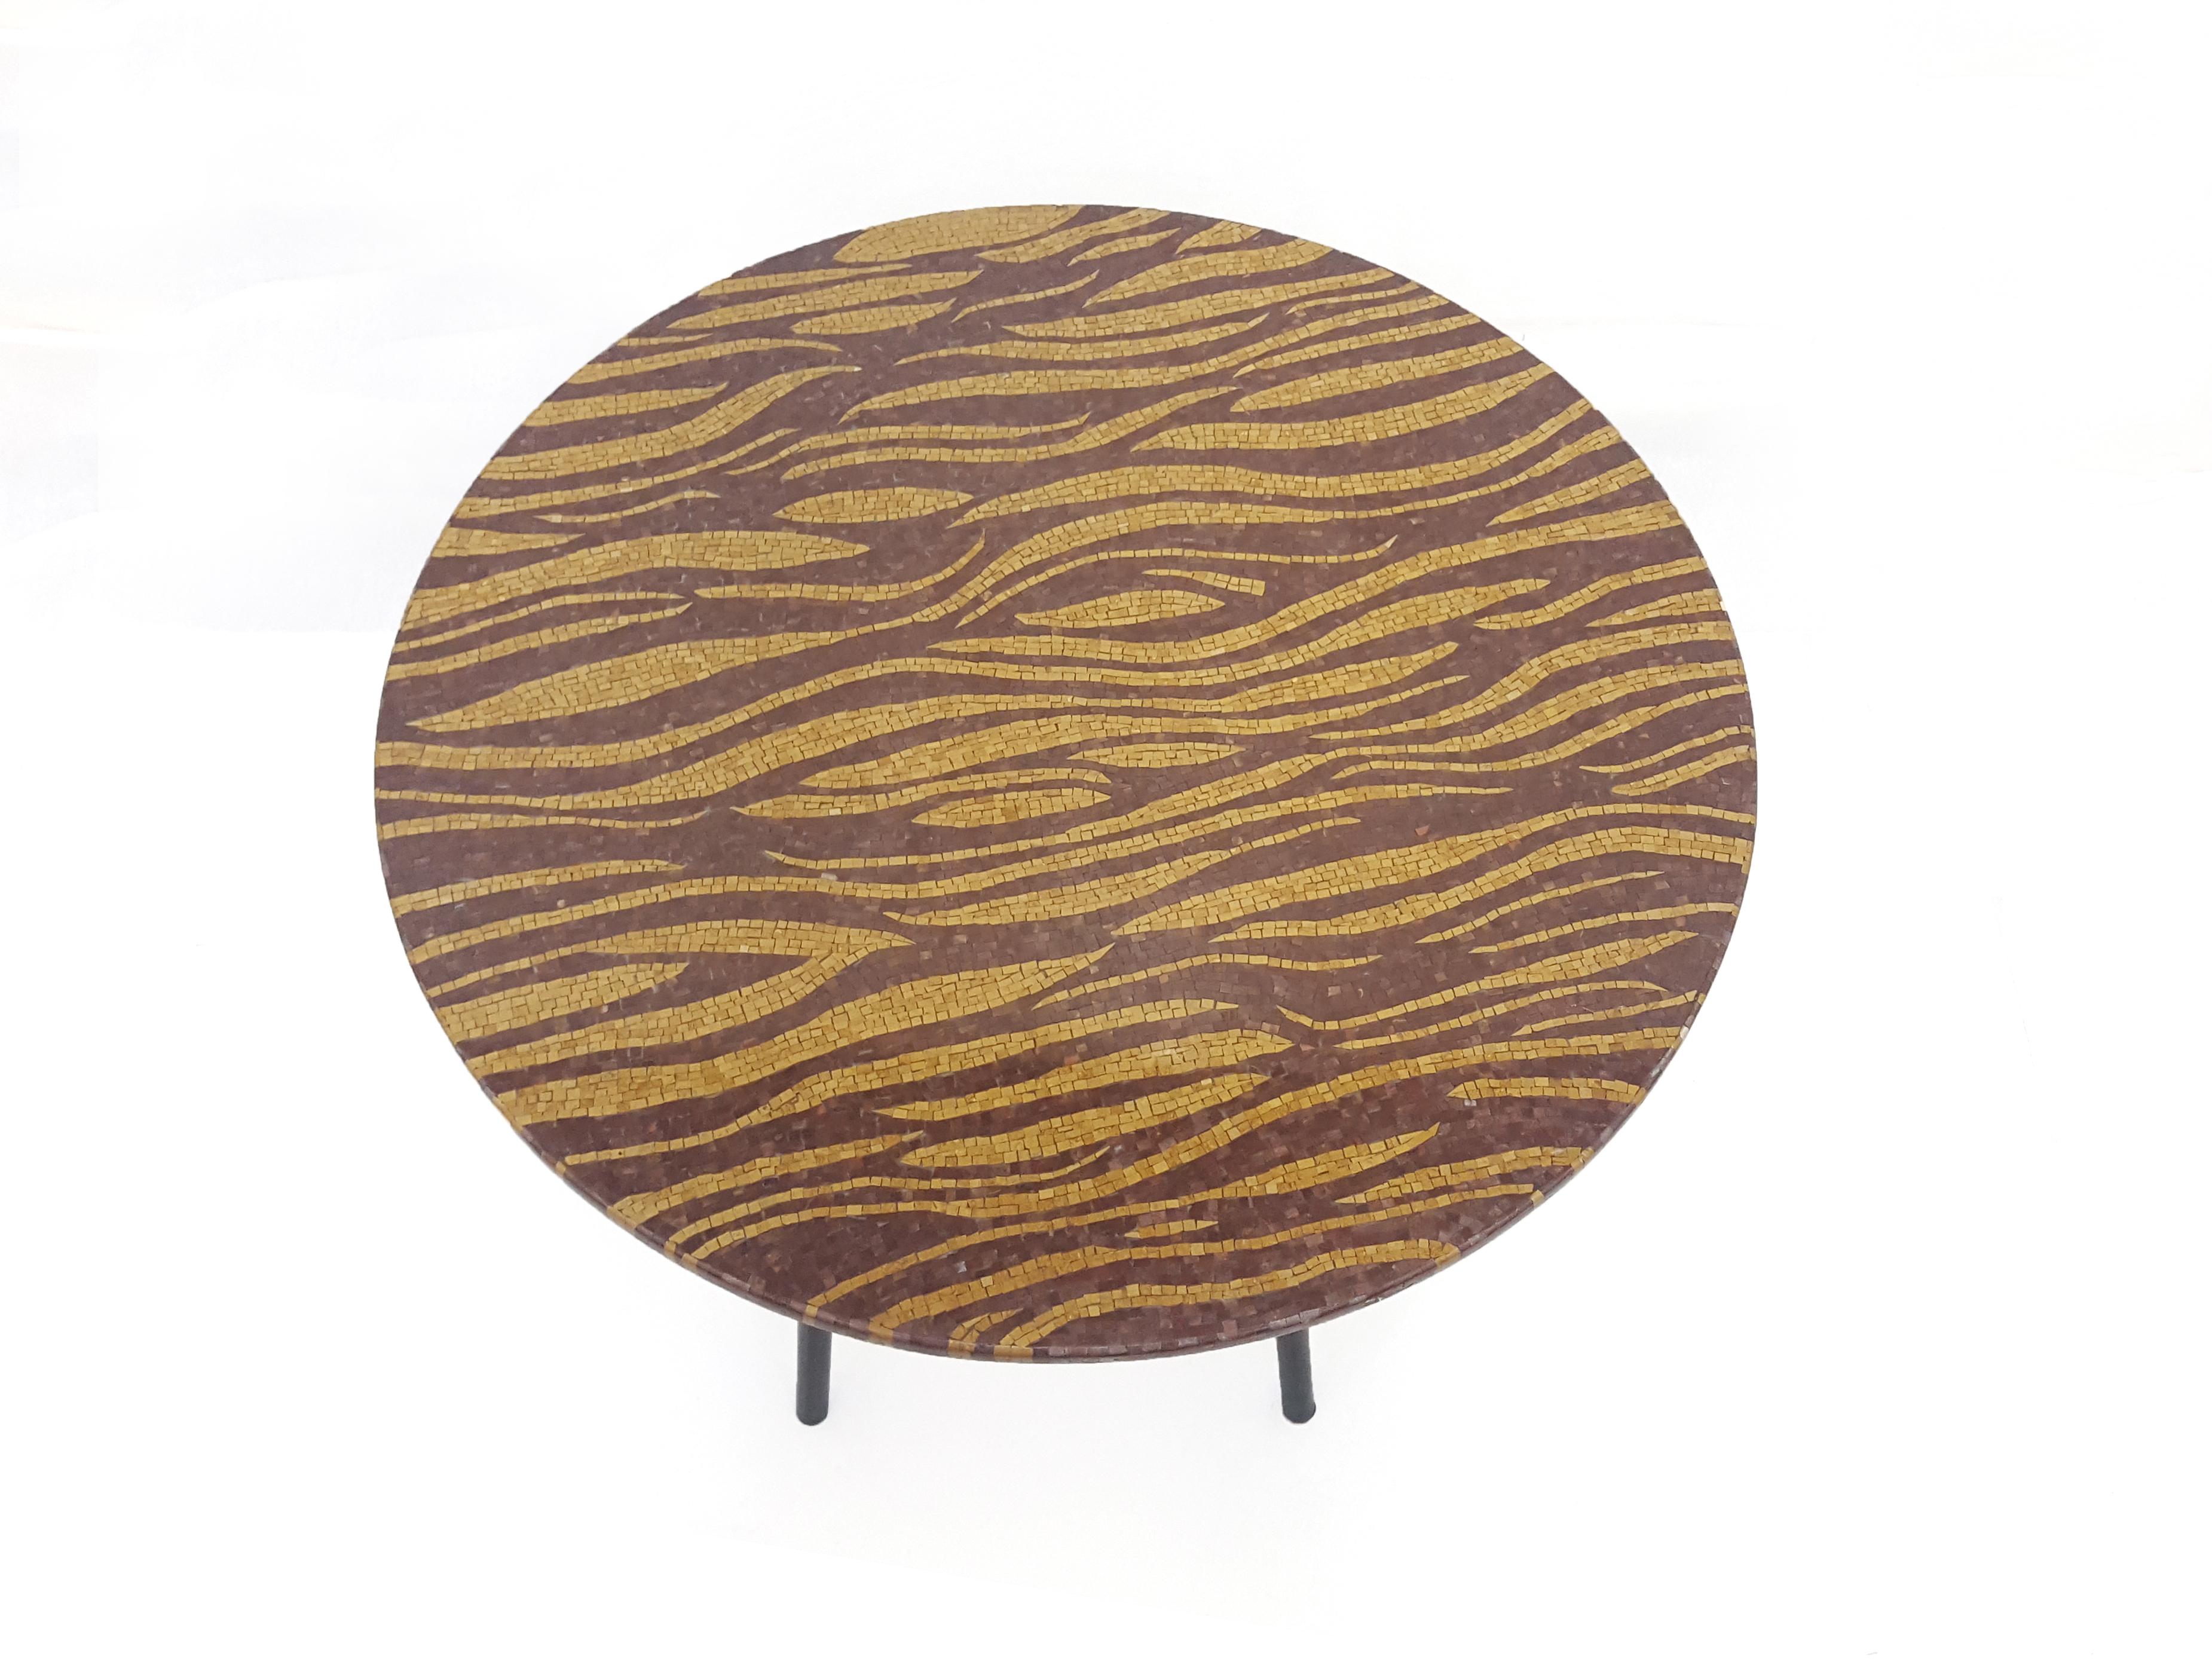 The Tiger Table is inspired by one of the most popular Stephanie Odegard's carpet designs. The table is made with a high quality fine stone mosaic overlay of semi-precious and fossil stones. Each piece of stone is about 8mmx8mm each is carefully